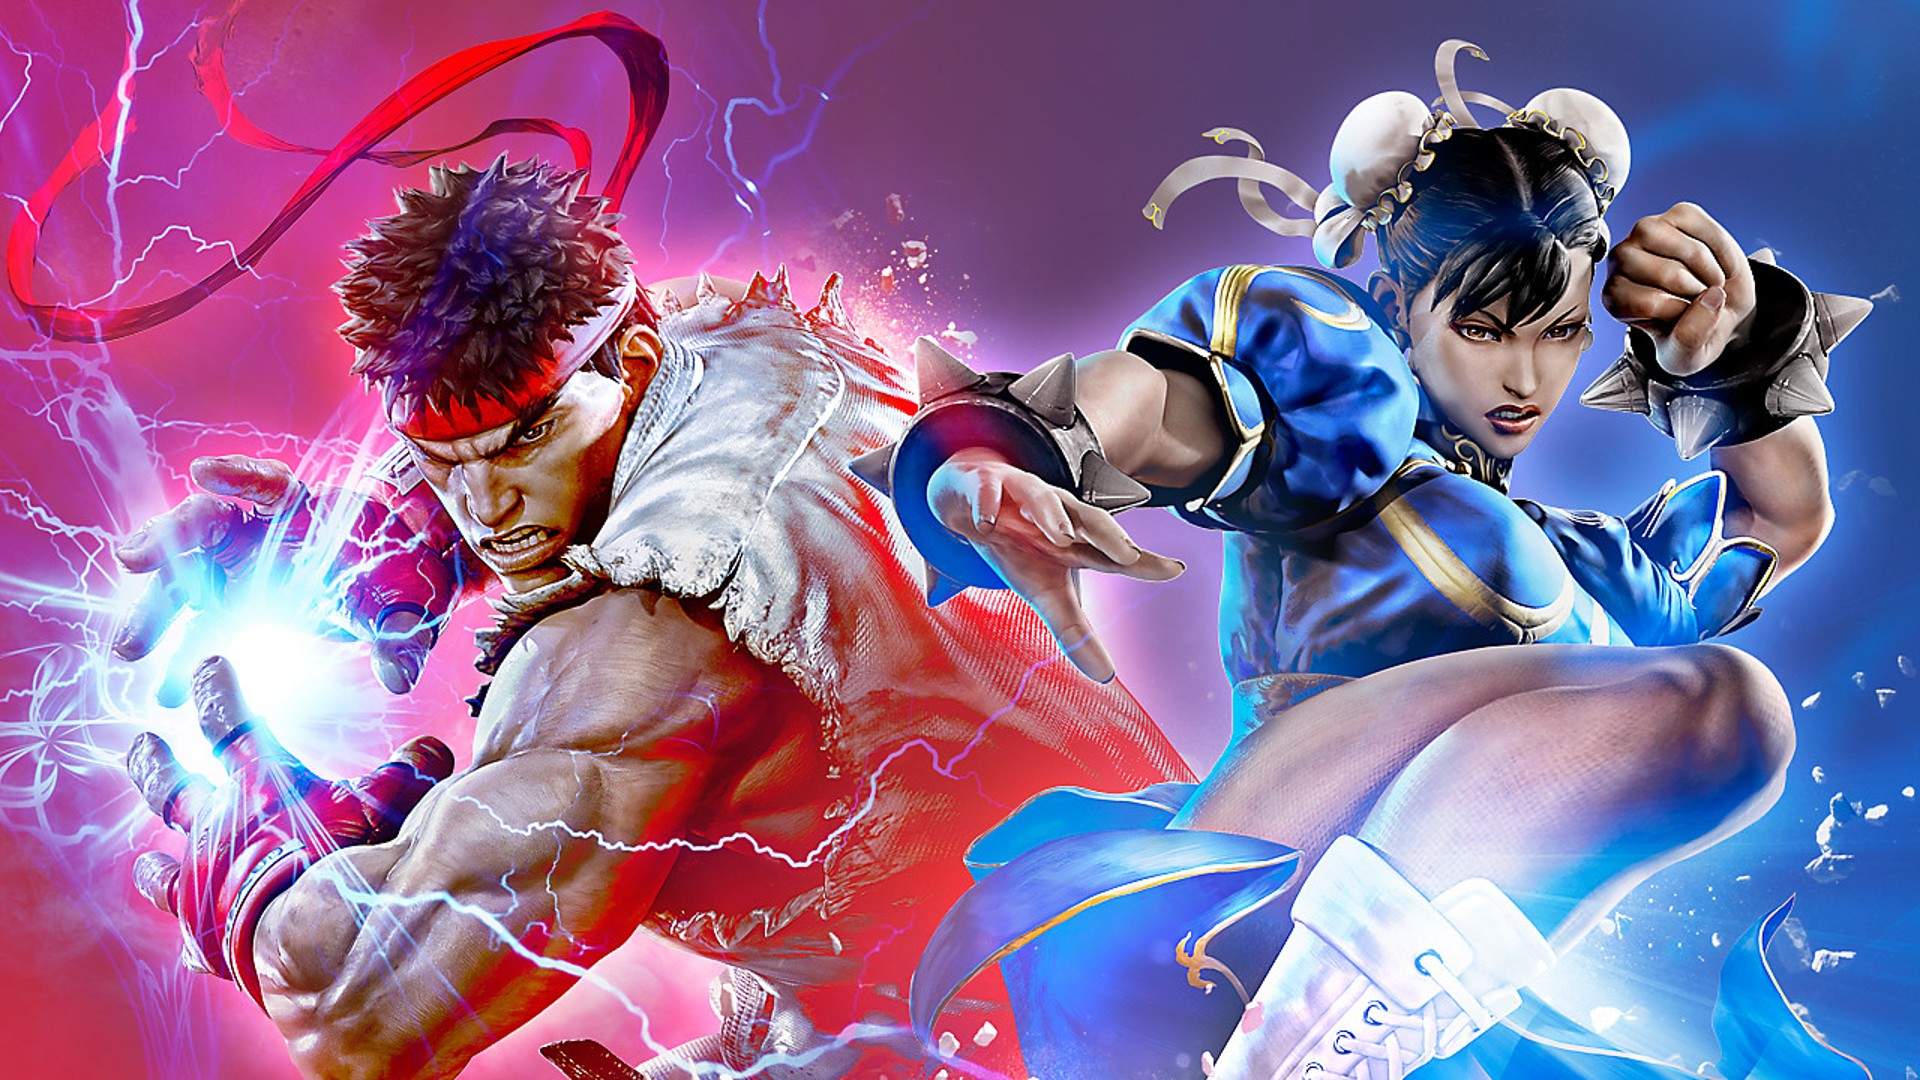 Street Fighter 6 Demo Out Now on PS4/PS5, Next Week on PC/Xbox